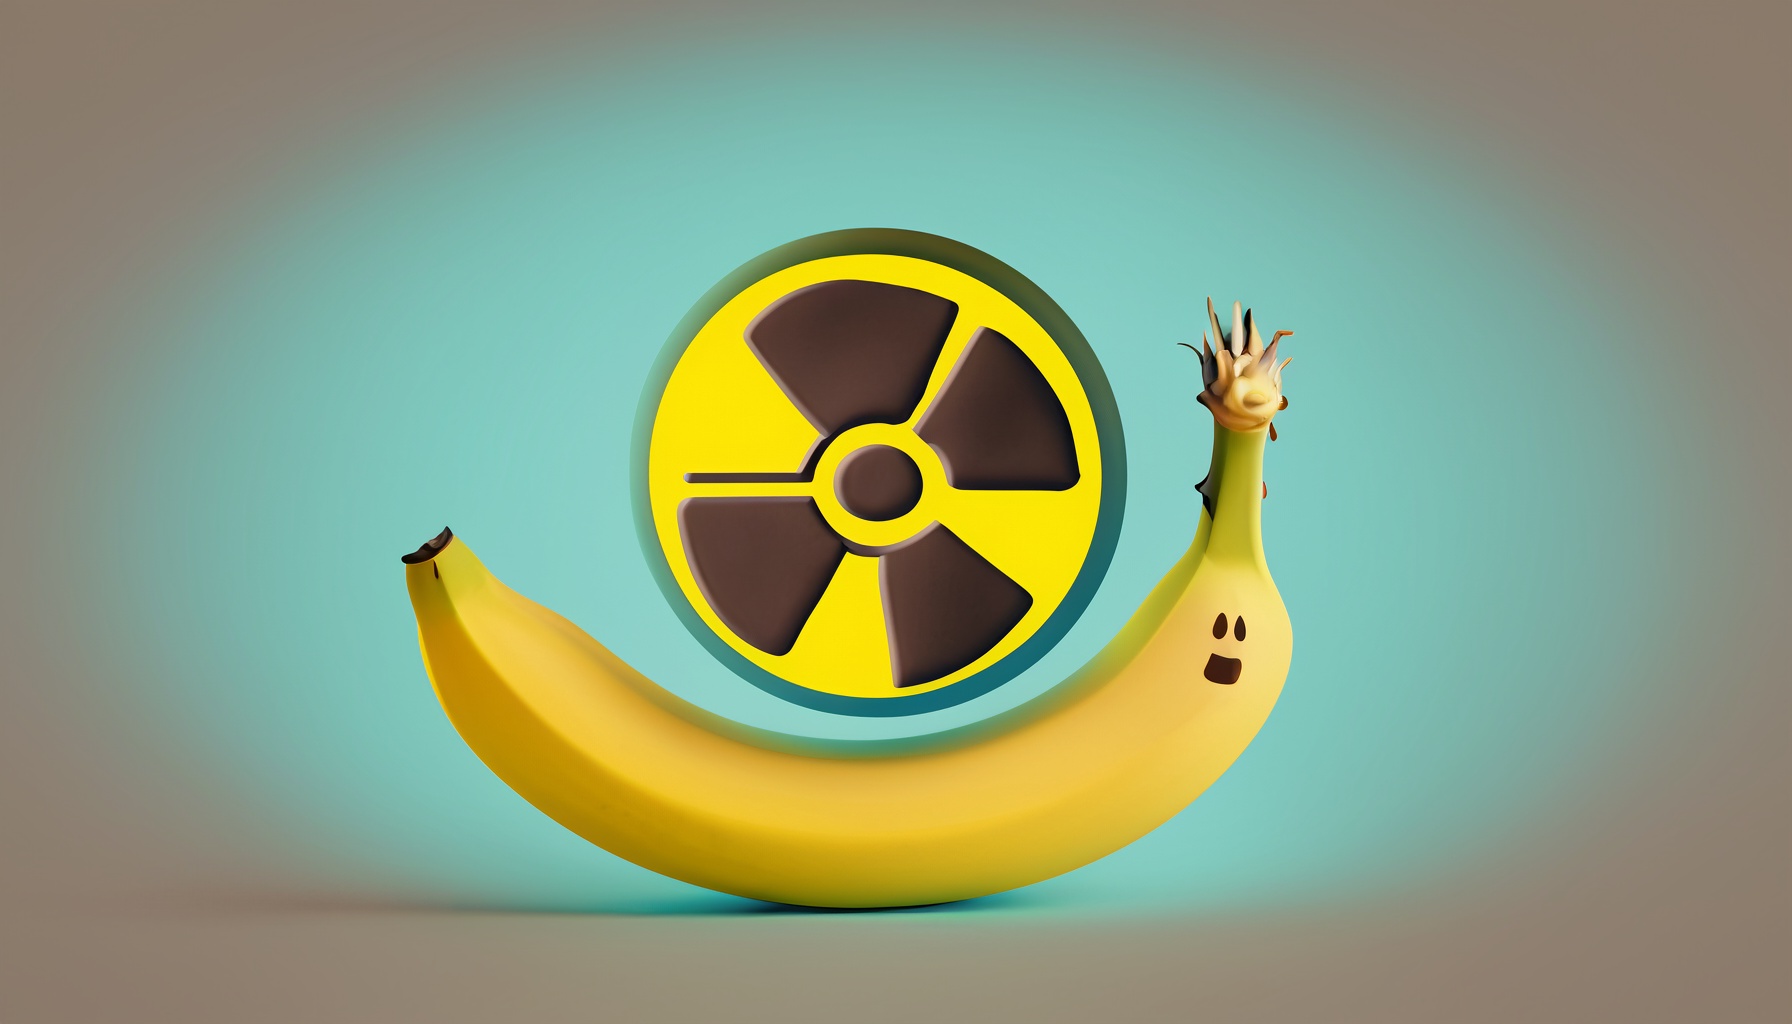 Bananas are naturally radioactive due to their potassium content